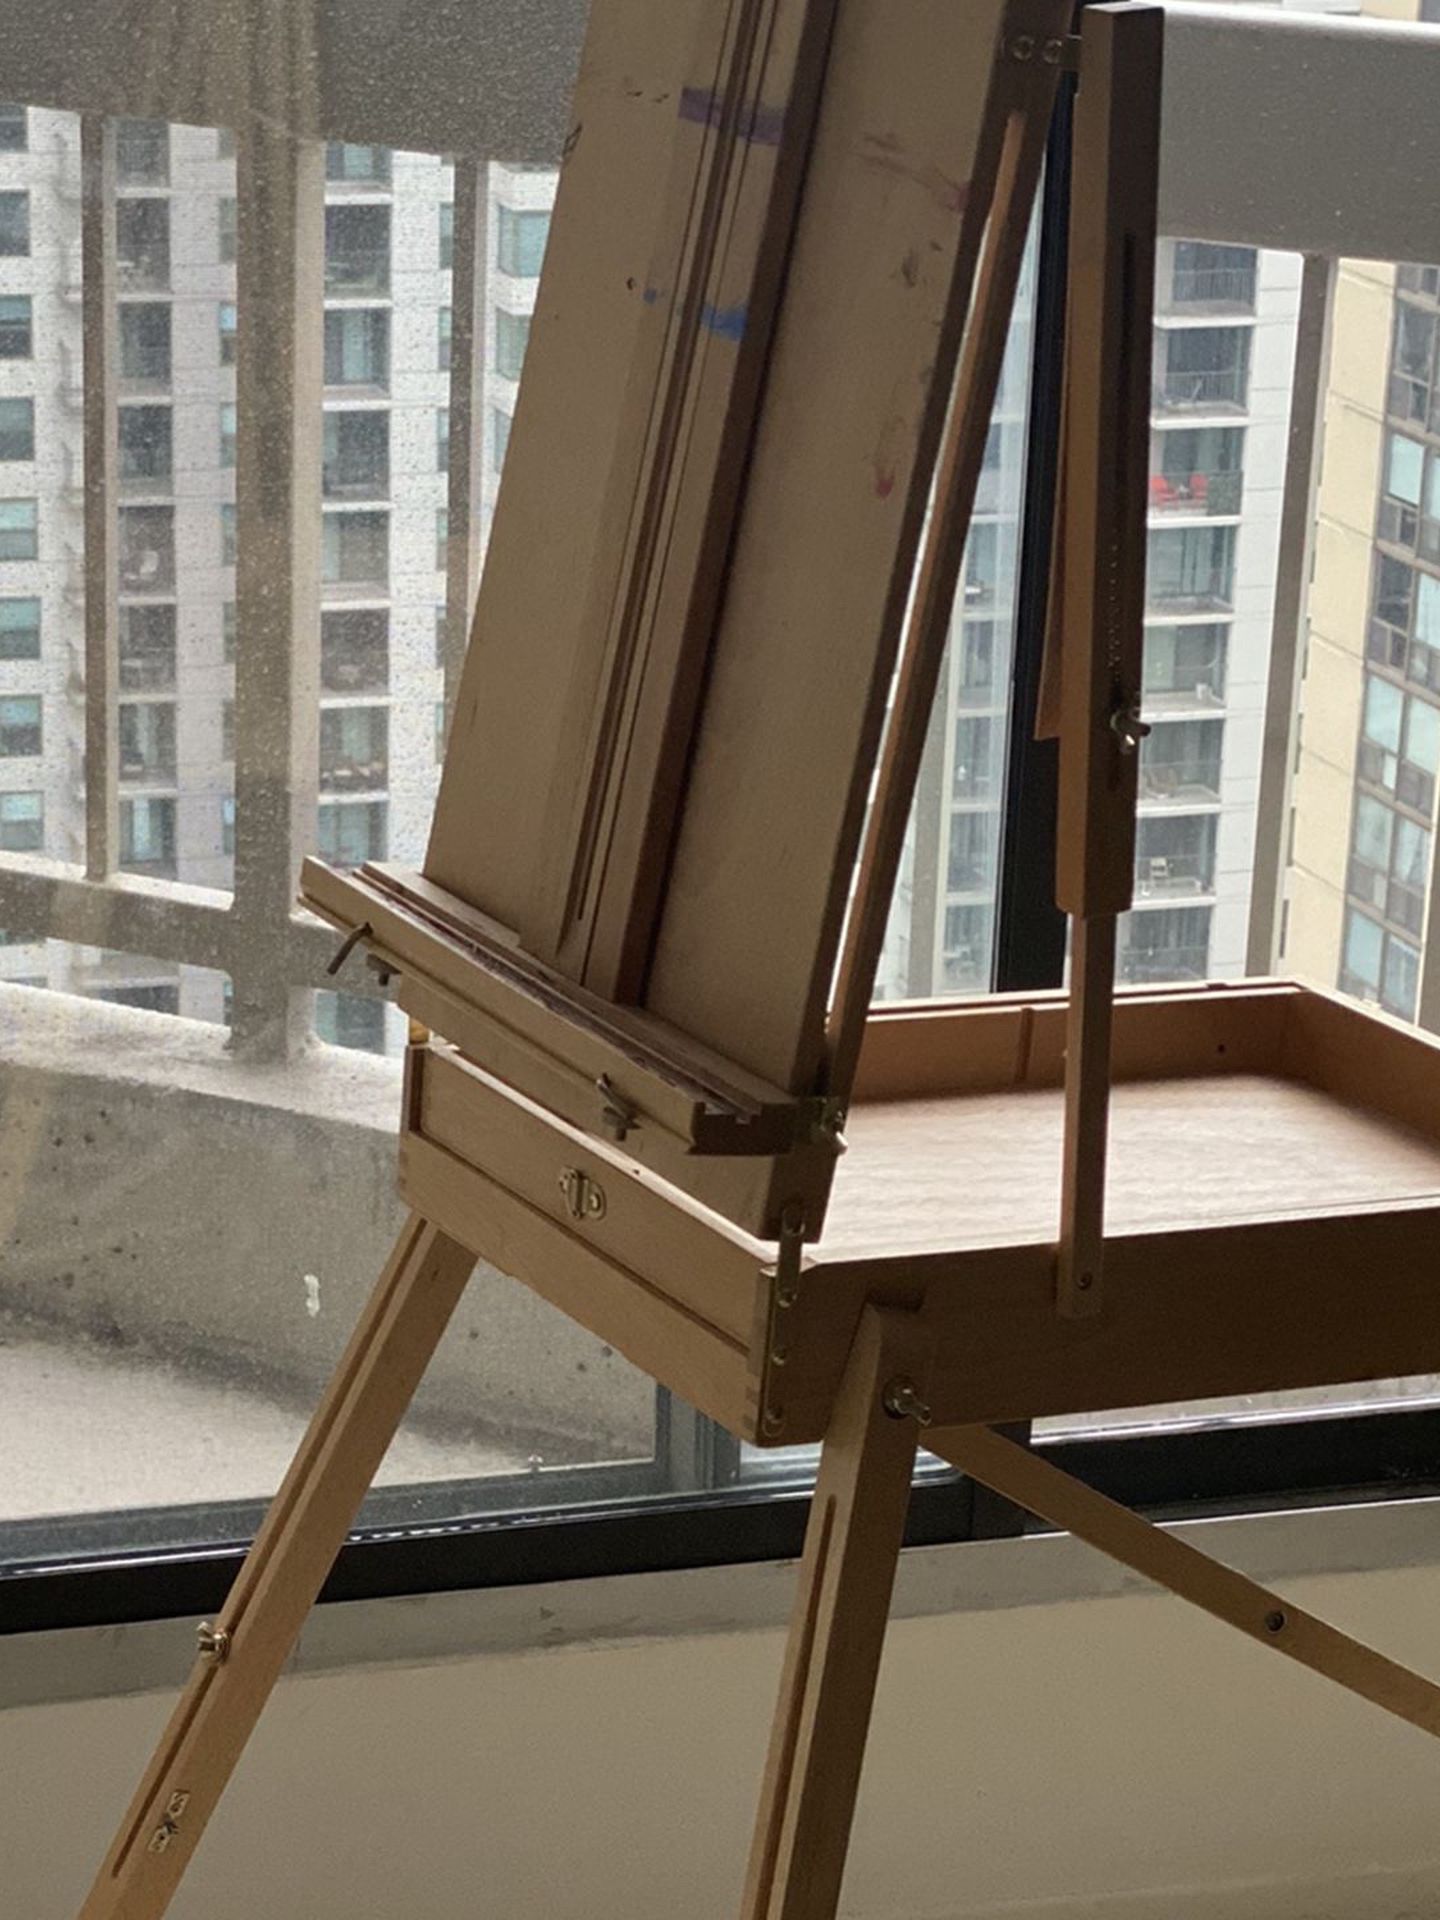 Easel & Paint Kit For Sale! -$85